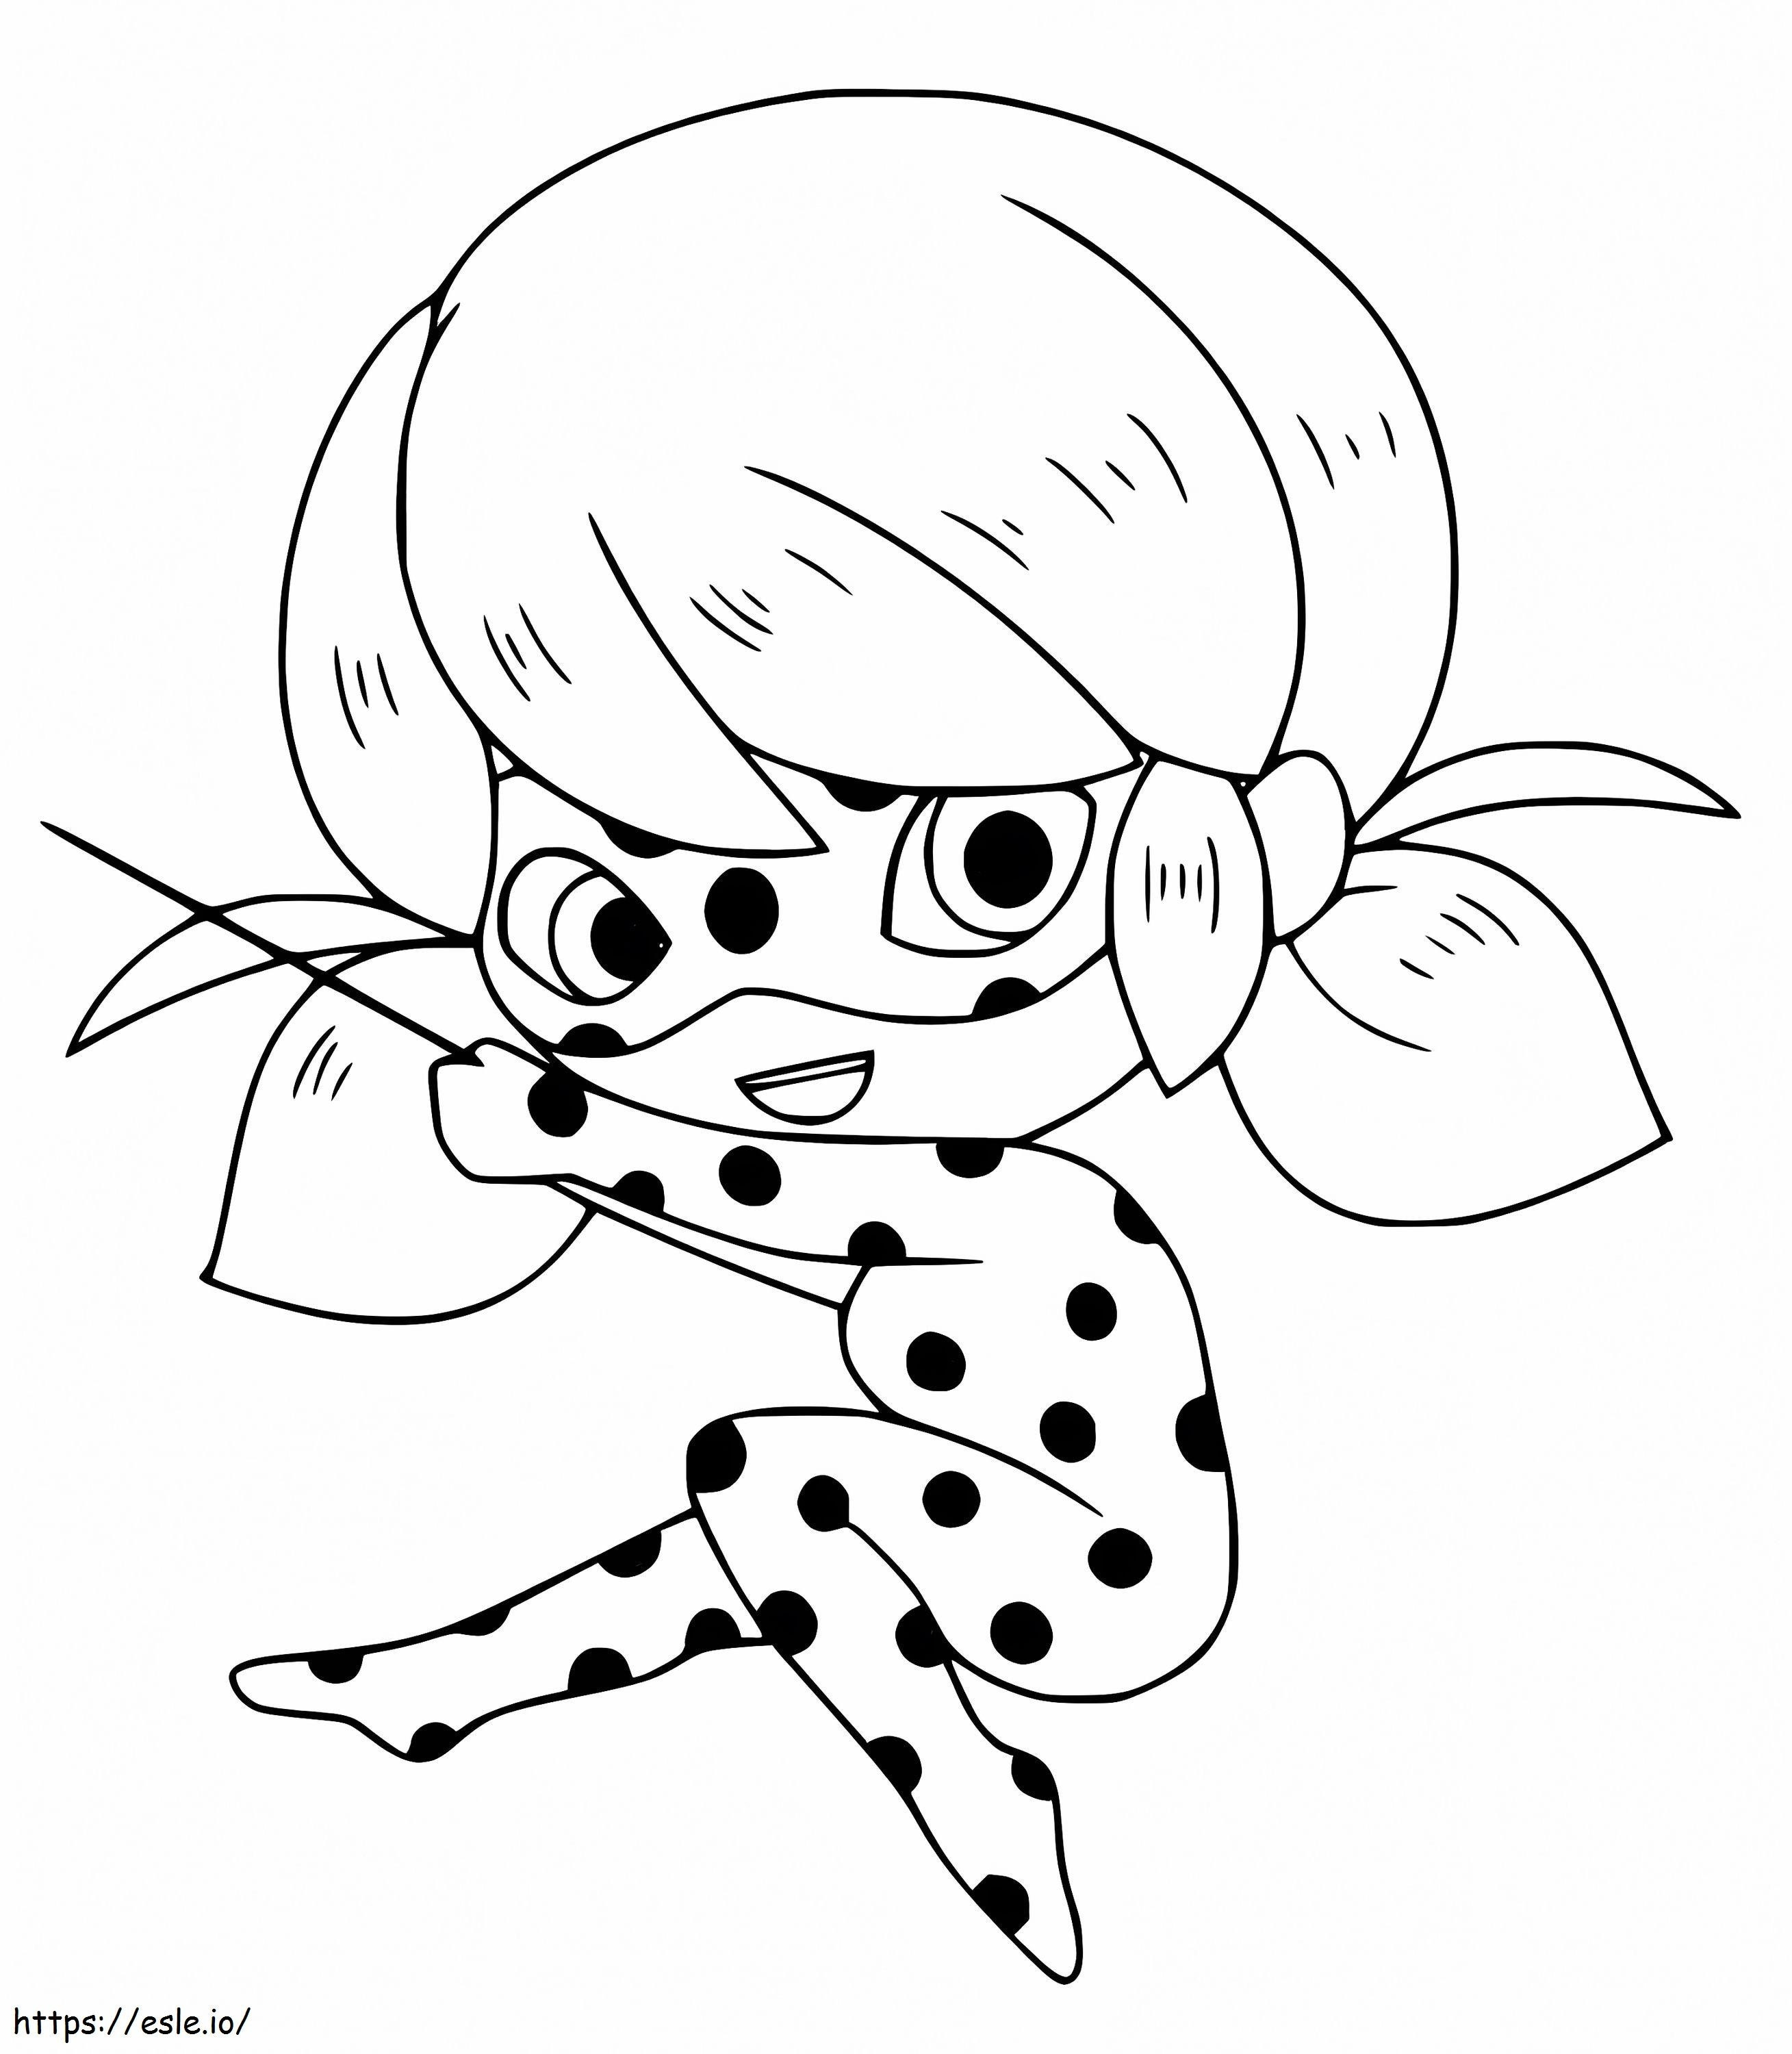 Cute Miraculous Ladybug coloring page